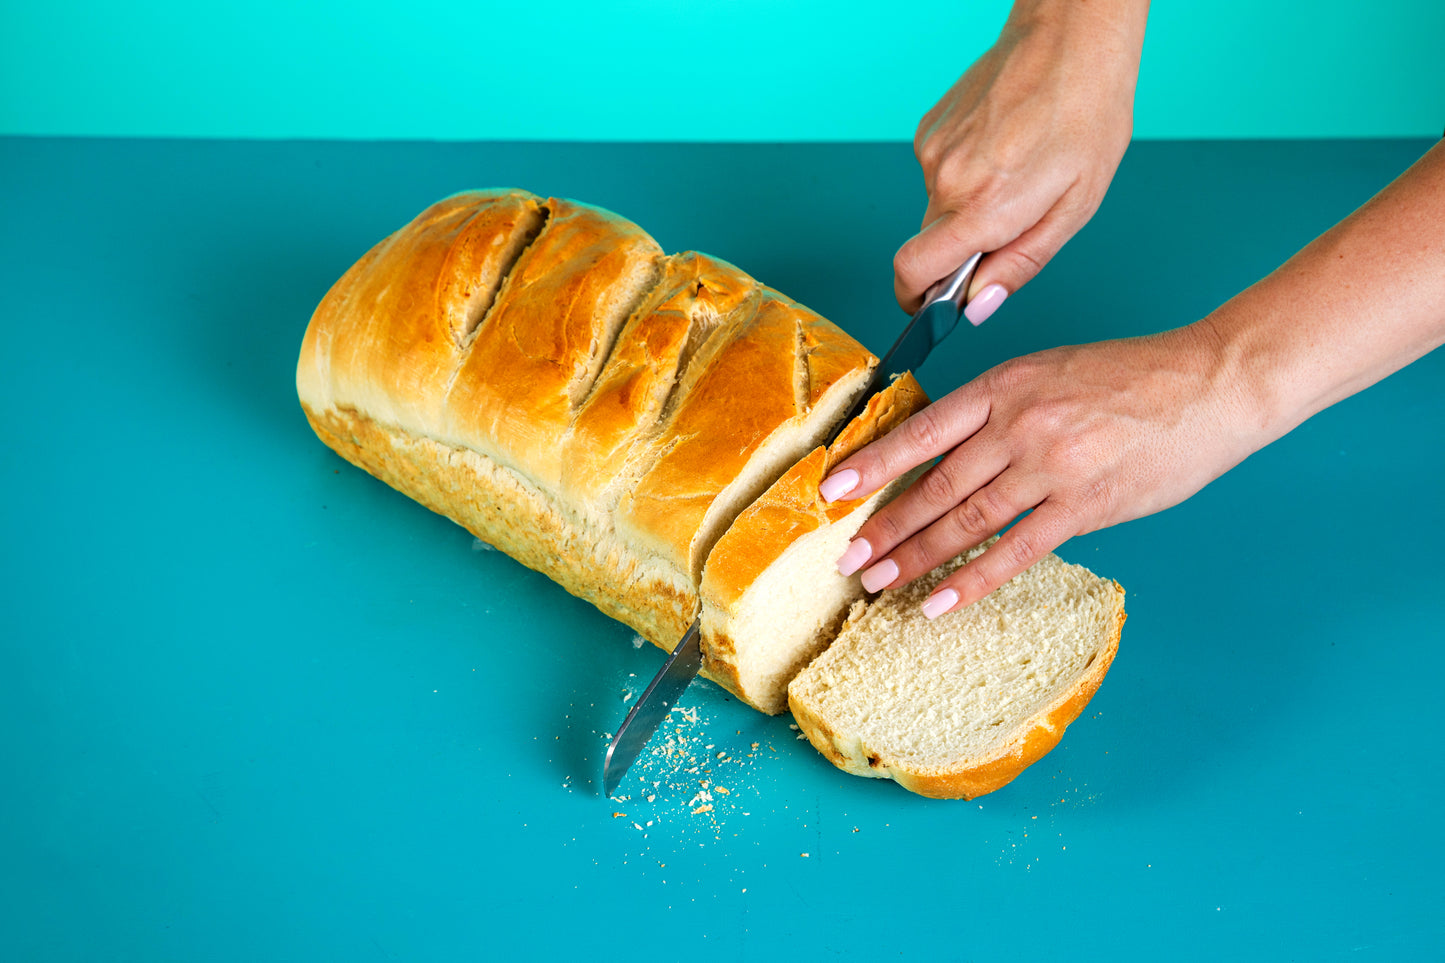 Polly's Pies loaf of Sourdough Bread on top of  a blue background. A hand  with pink nail polish is slicing the loaf with a bread knife.